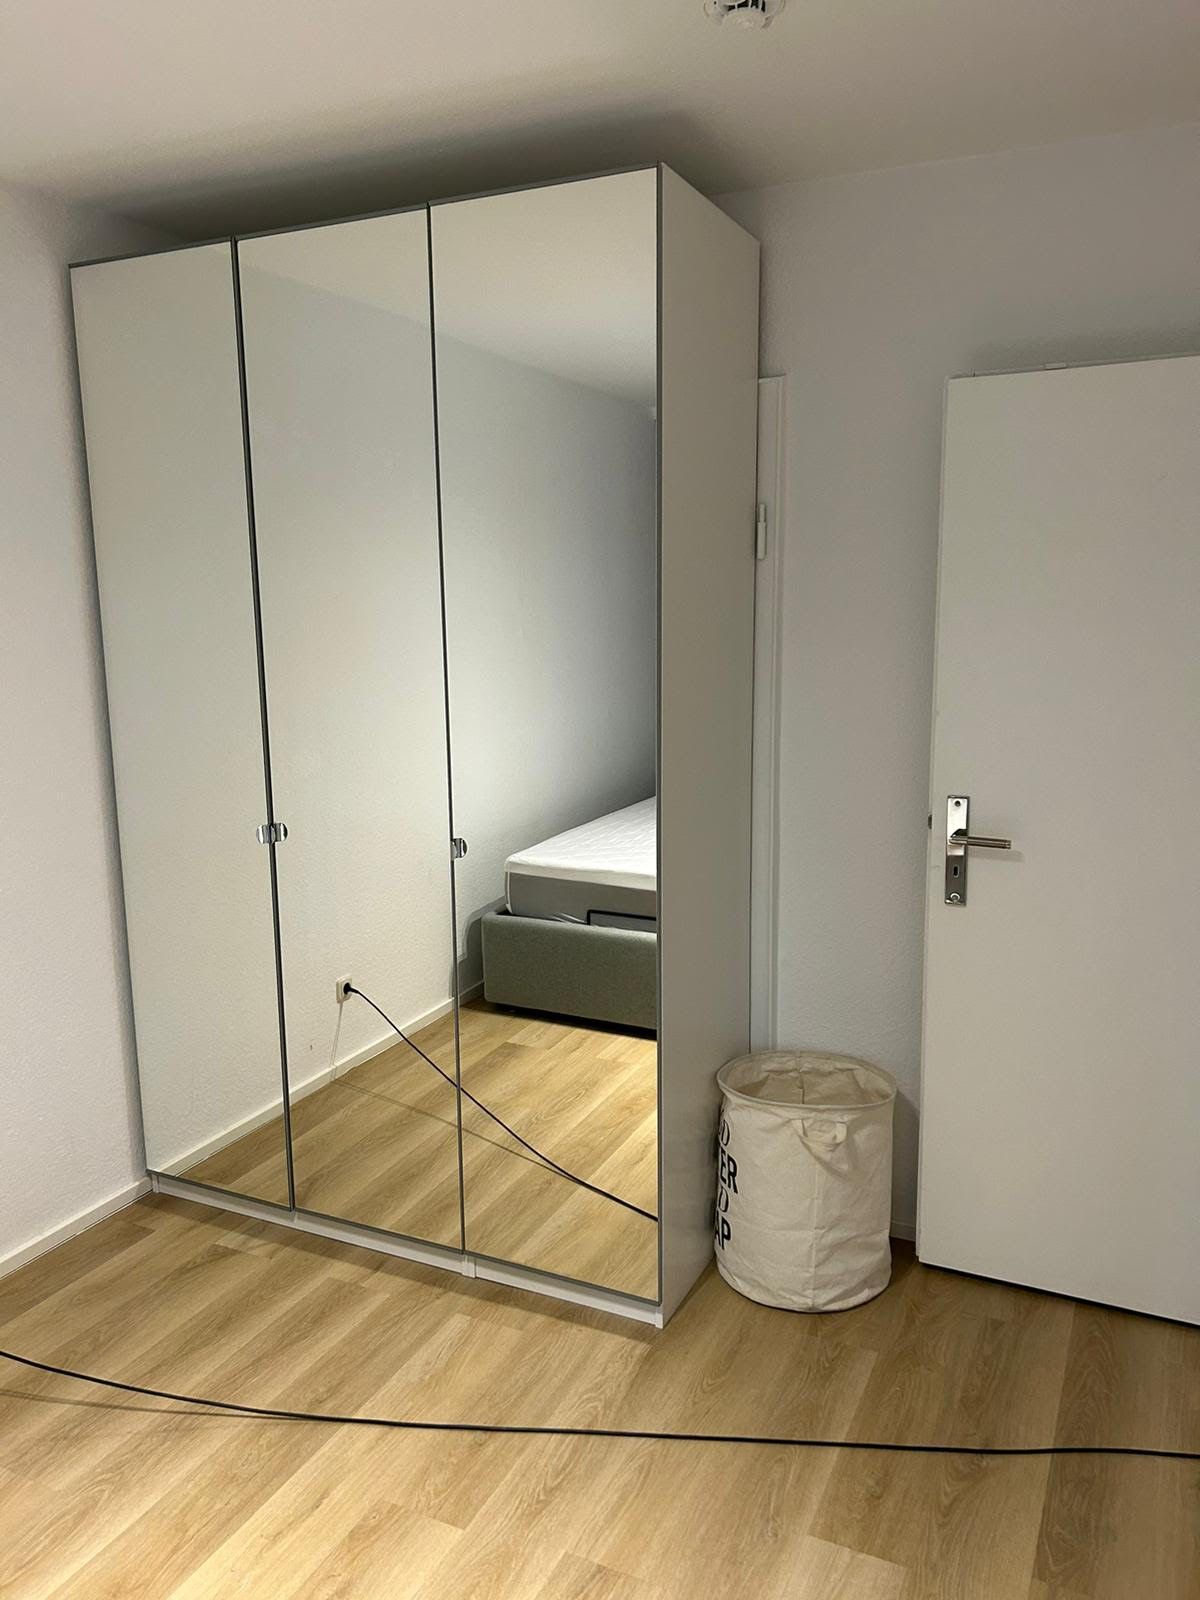 1 Bedroom Appartment for 1 month